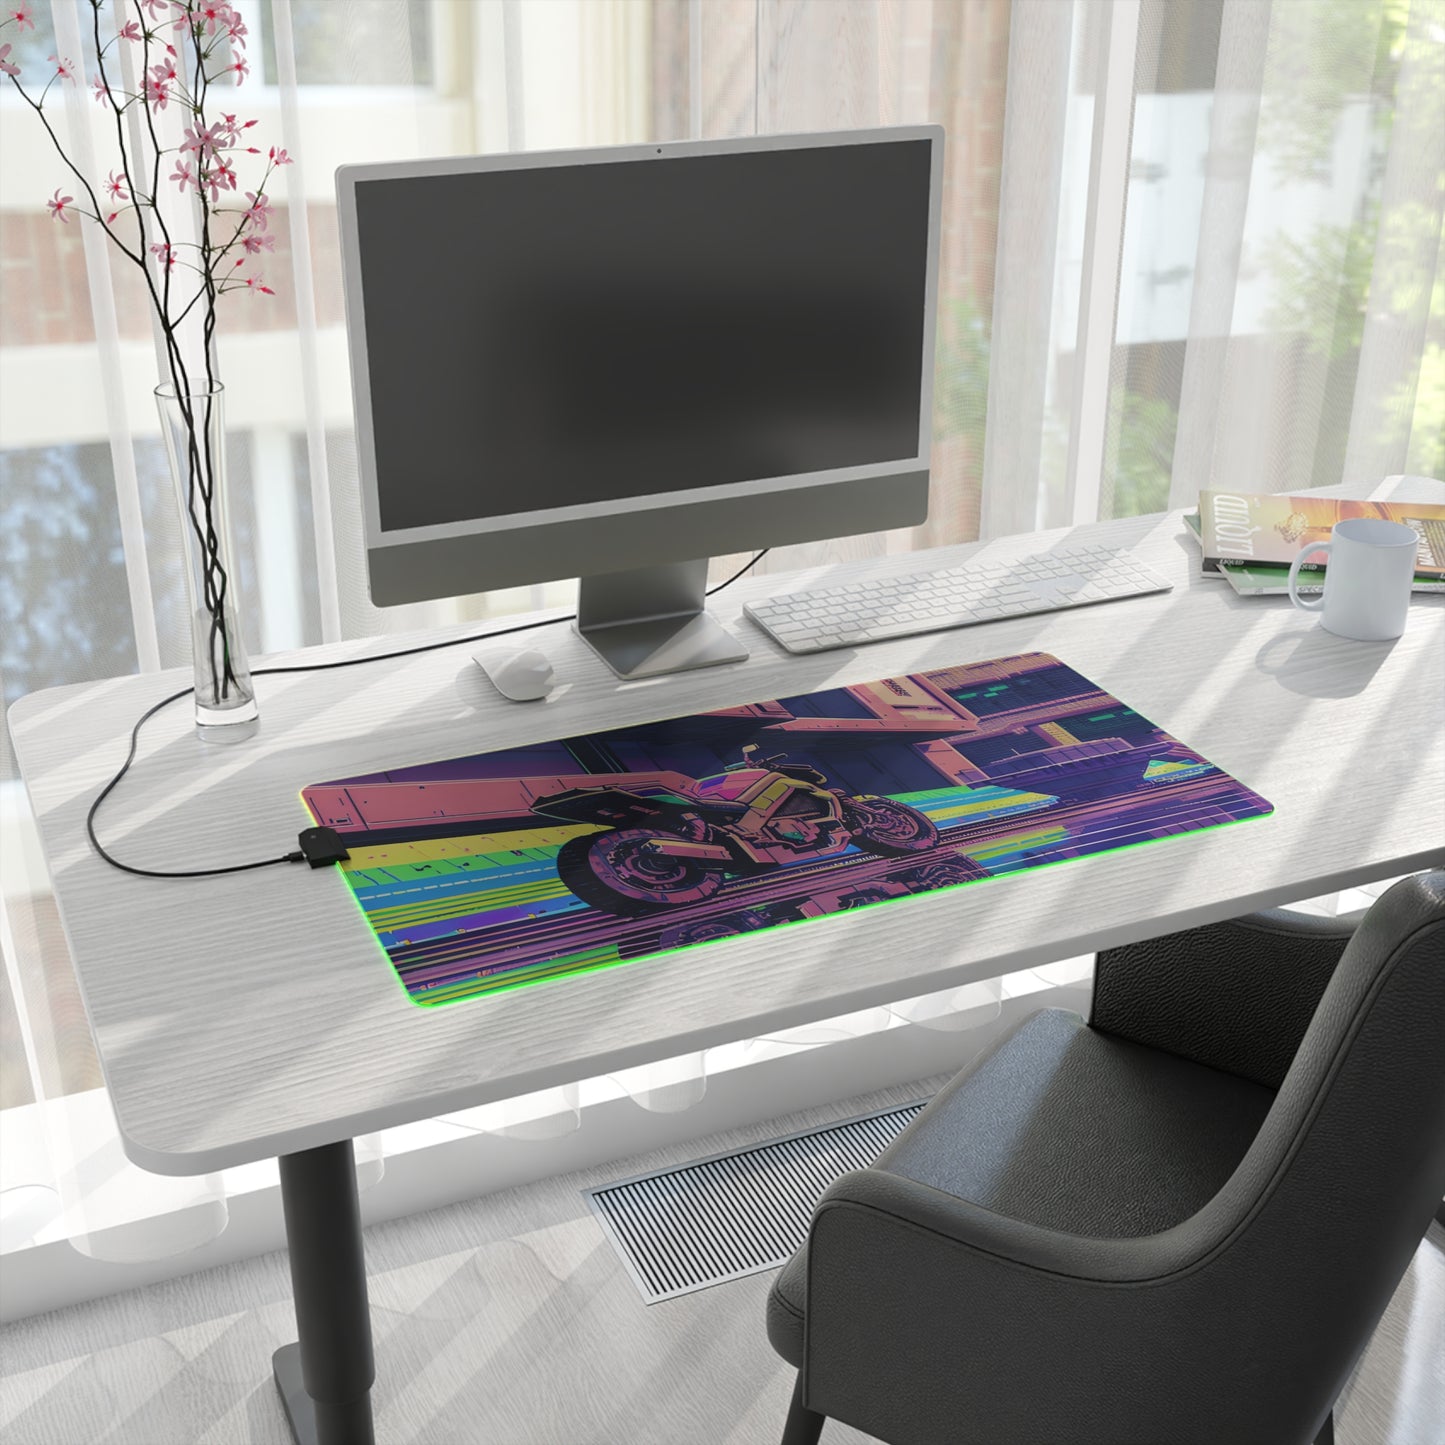 Pixel motorcycle LED Gaming Mouse Pad